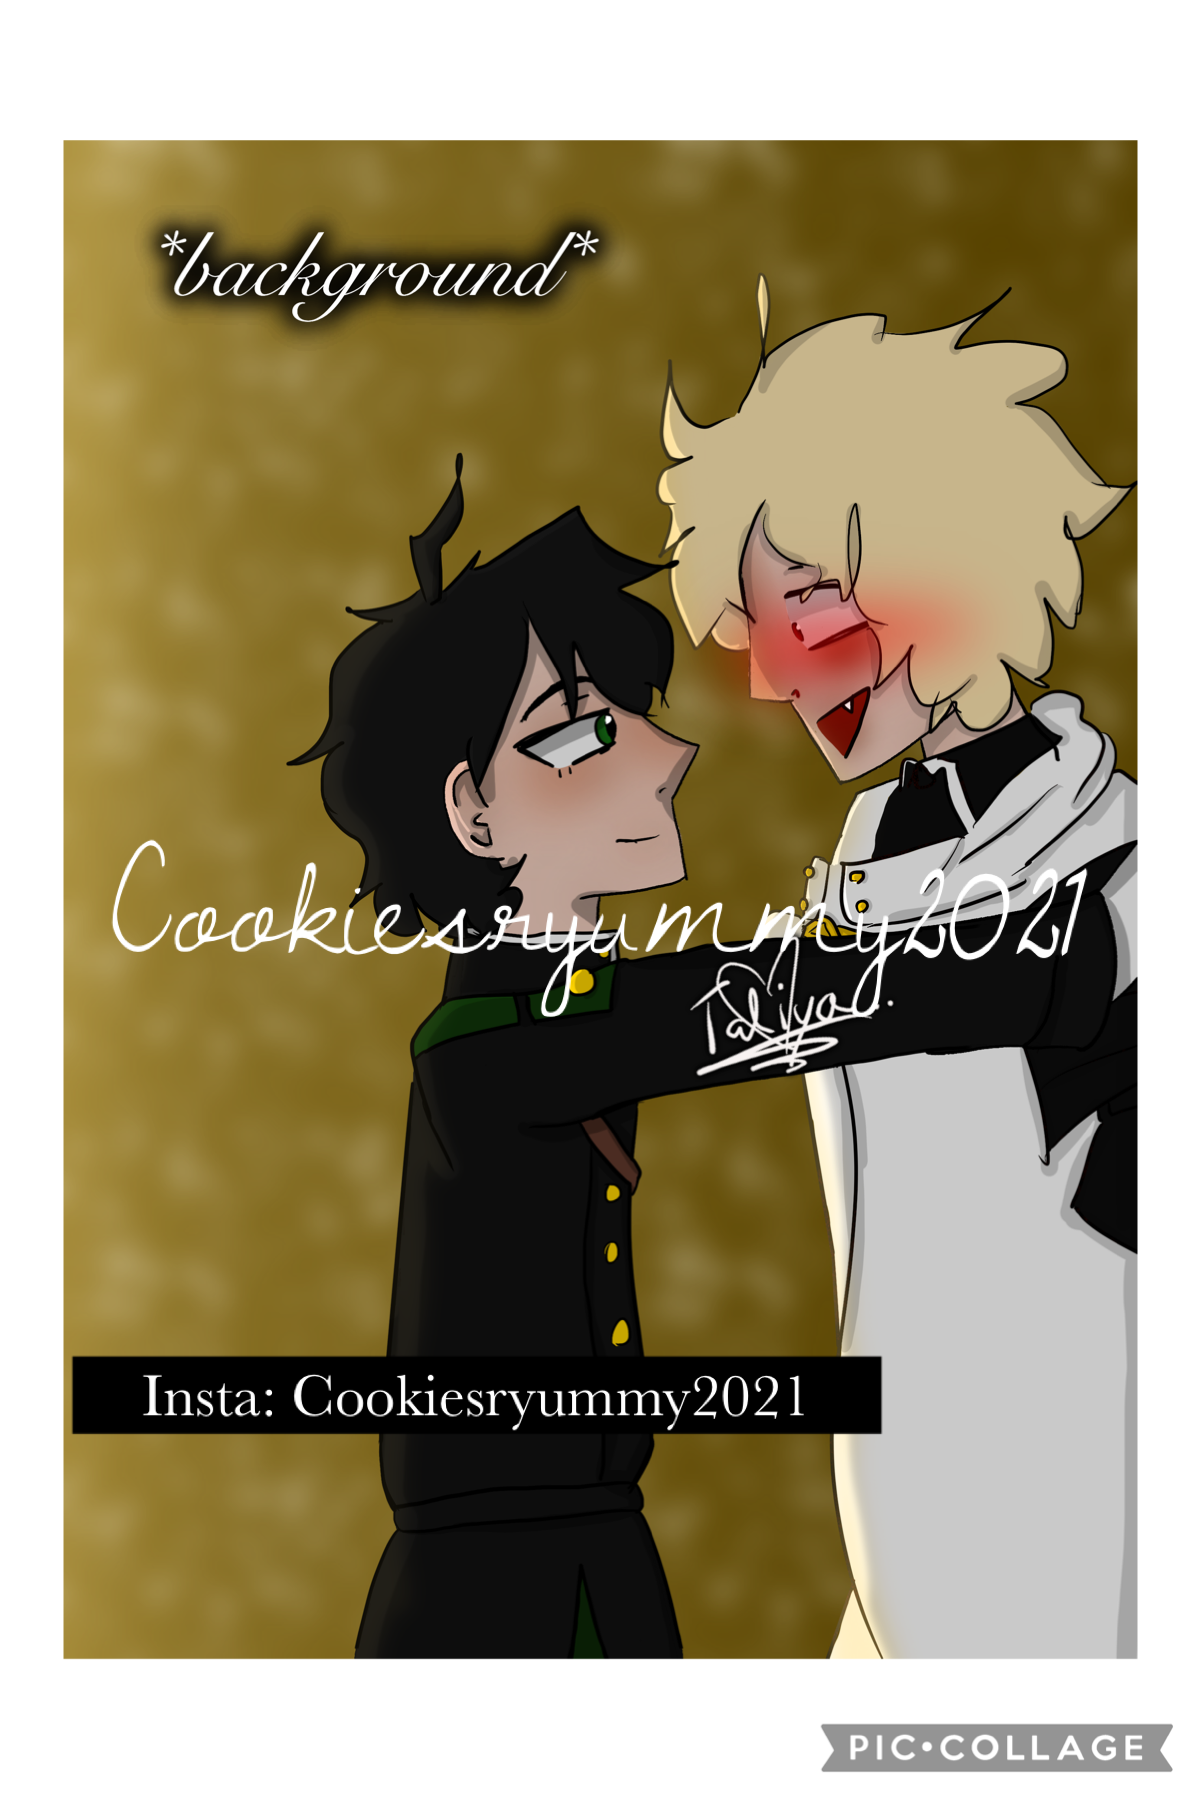 Mikayuu from Owari no seraph (I donno do I tag stuff or something? *confused*)
#mikayuu #owarinoseraph #seraphoftheend #anime I have no idea what I’m doing! Anyways my Instagram is Cookiesryummy2021 I post art and stuff mostly anime fanart I do!!!